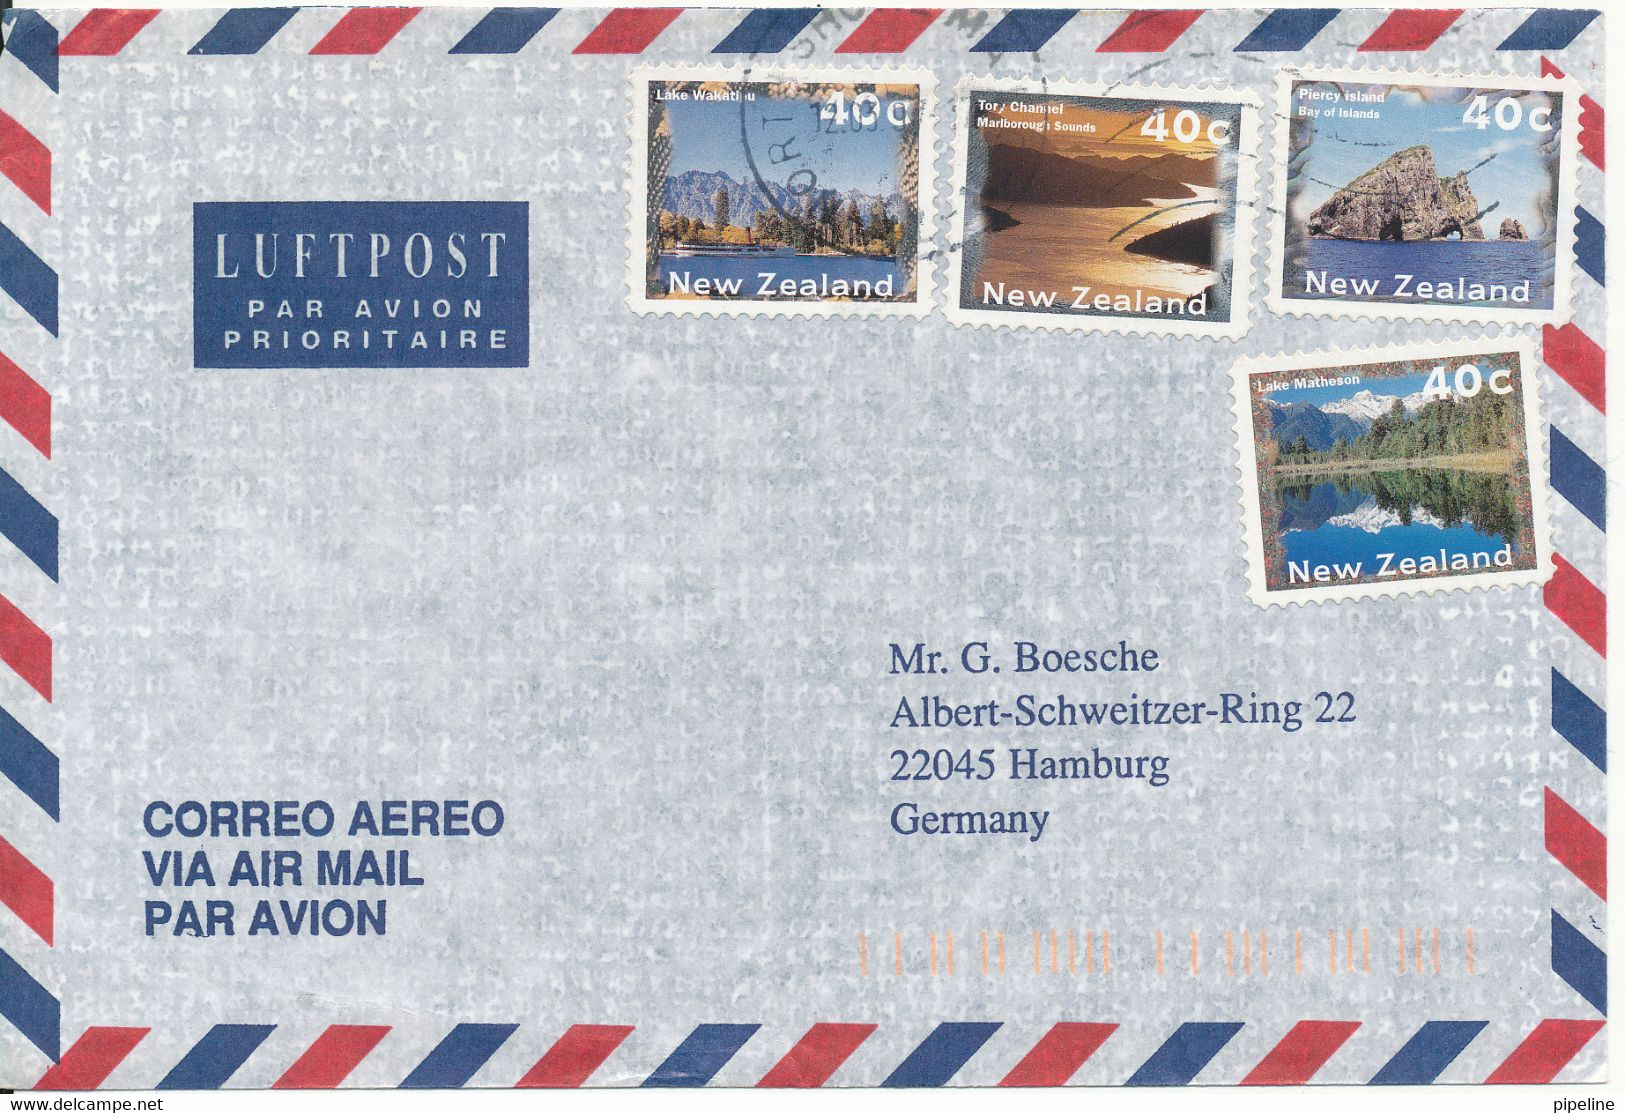 New Zealand Air Mail Cover Sent To Germany 12-3-1997 - Luftpost